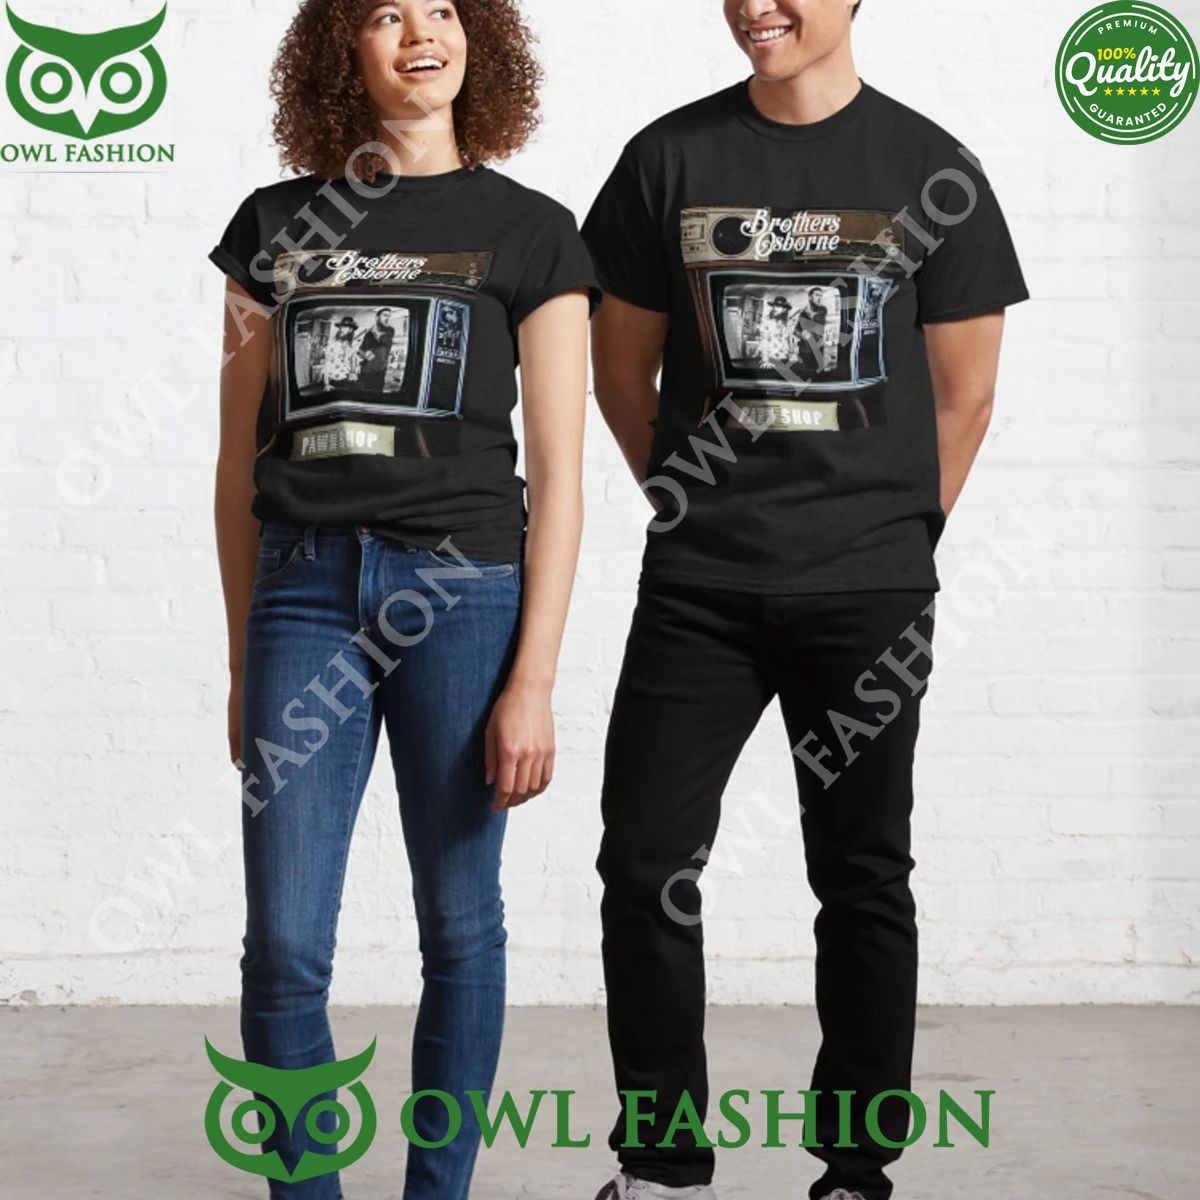 pawn shop brothers osborne american country music duo t shirt 1 RIvso.jpg